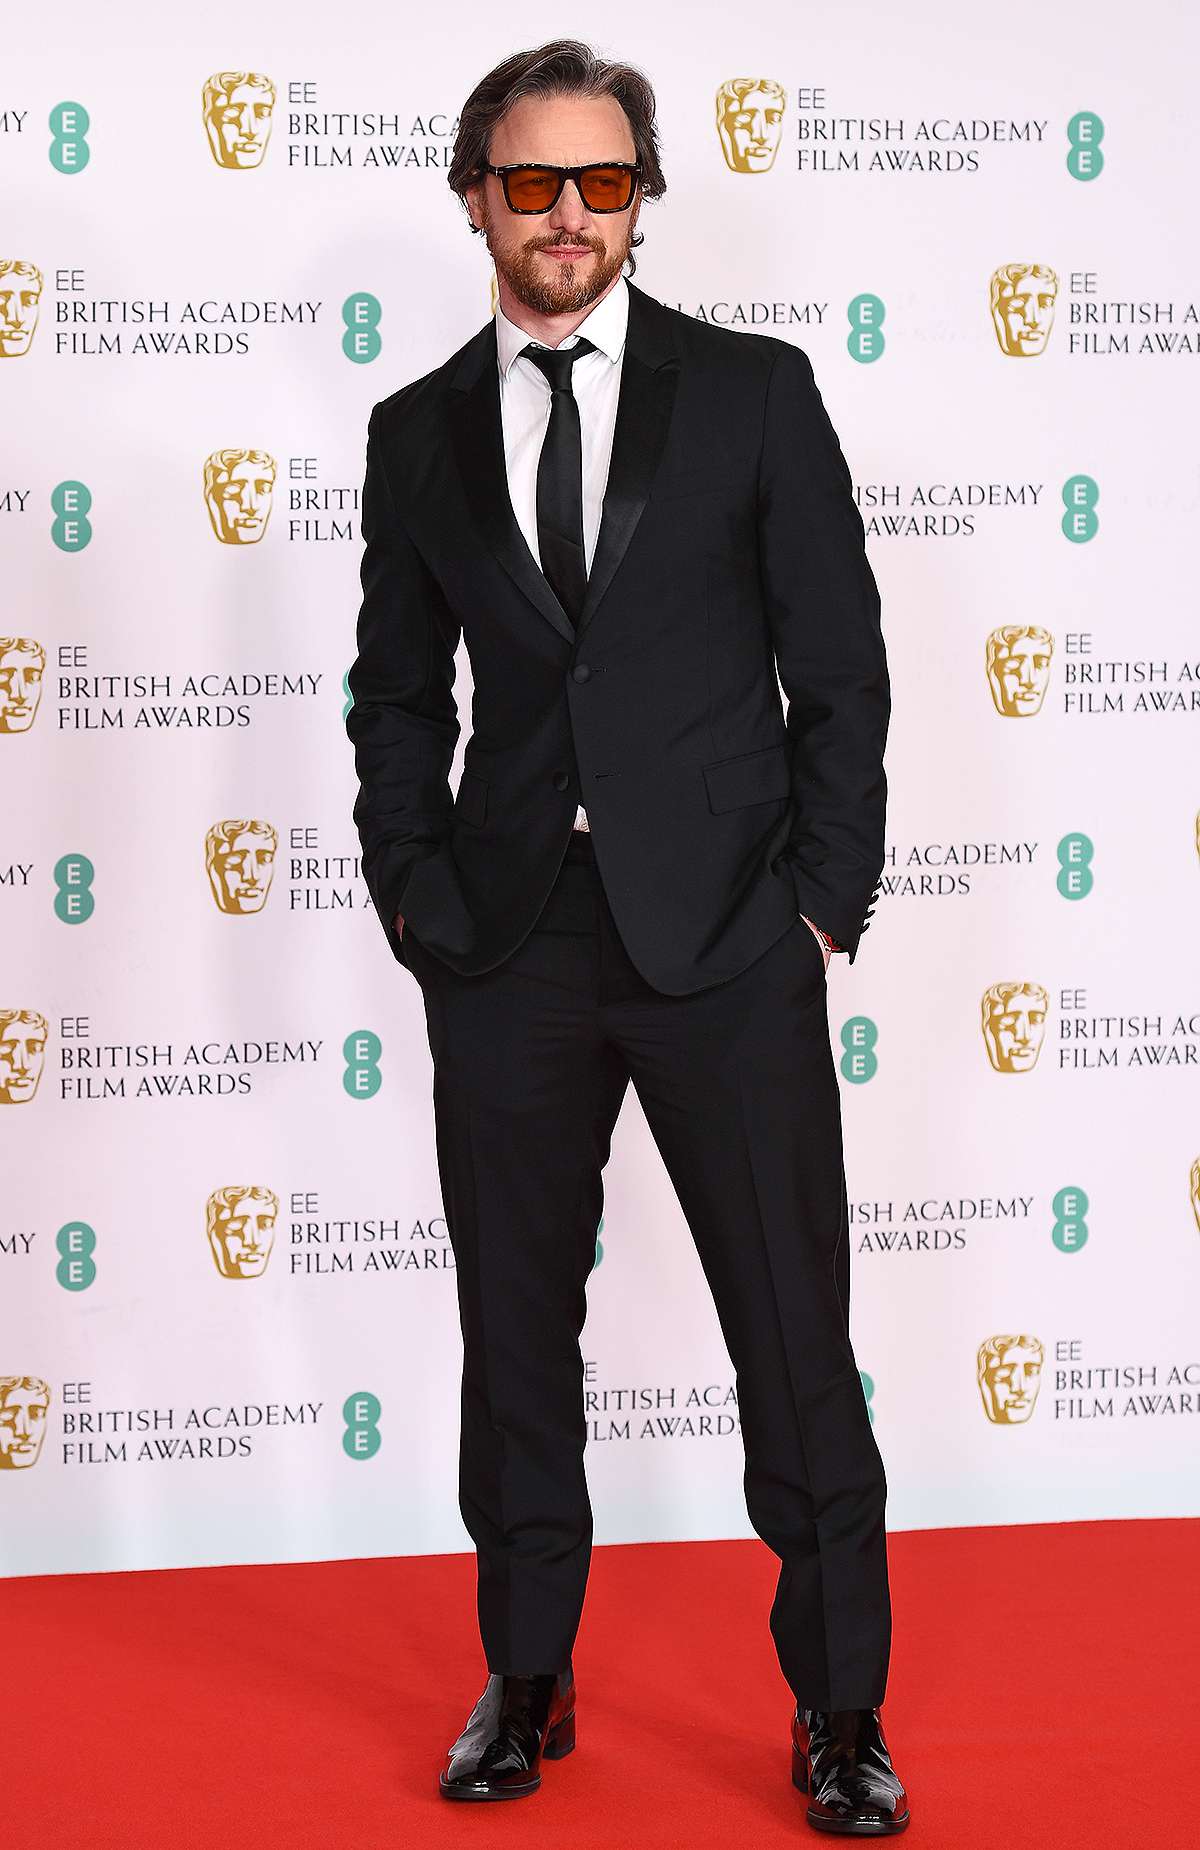 James McAvoy attends the EE British Academy Film Awards 2021 at the Royal Albert Hall on April 11, 2021